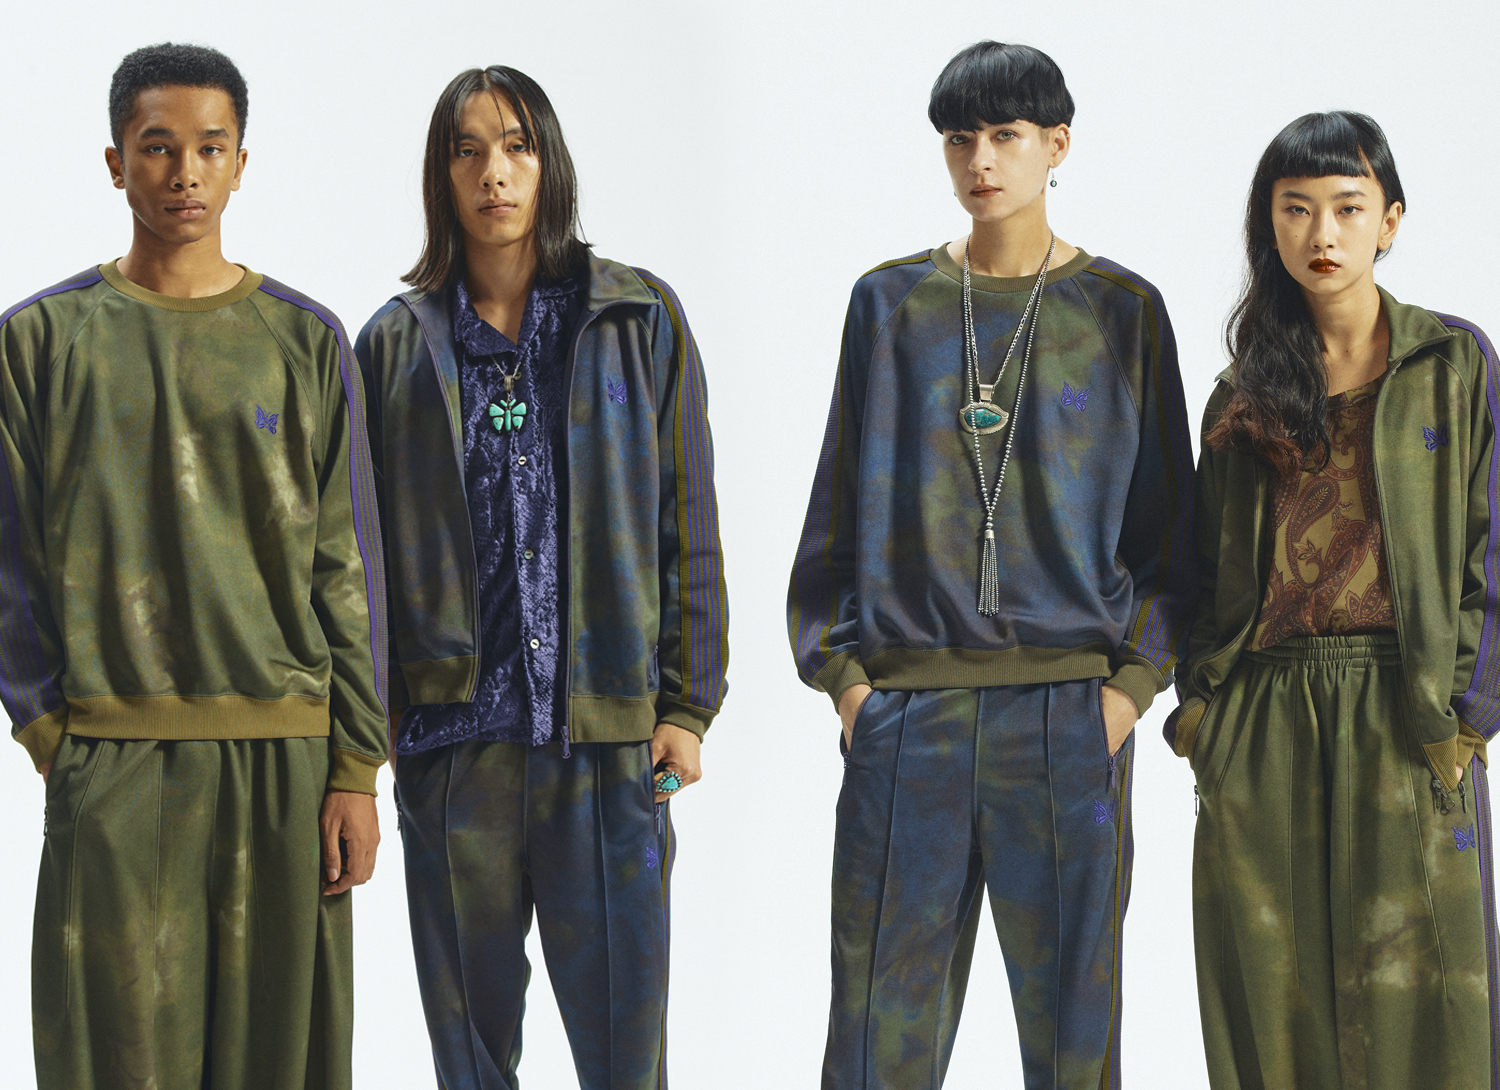 〈NEEDLES〉TRACK SUITS
PIRNTED UNEVEN DYE for NEPENTHES